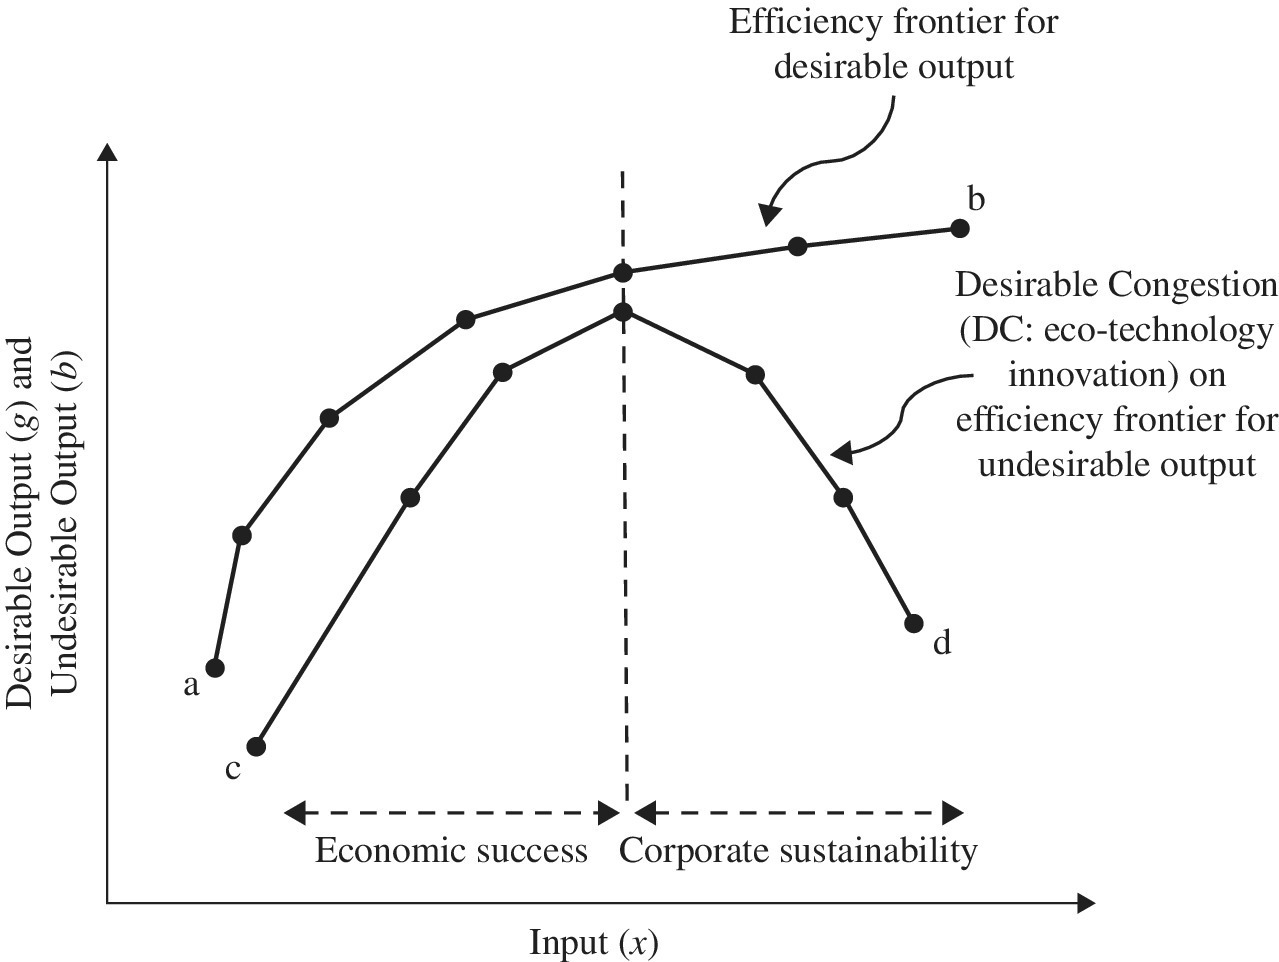 Graph of input (x) vs. desirable output (g) and undesirable output (b) displaying ascending (a–b) and ascending, descending (c–d) curves, with economic success (left) and corporate sustainability (right).